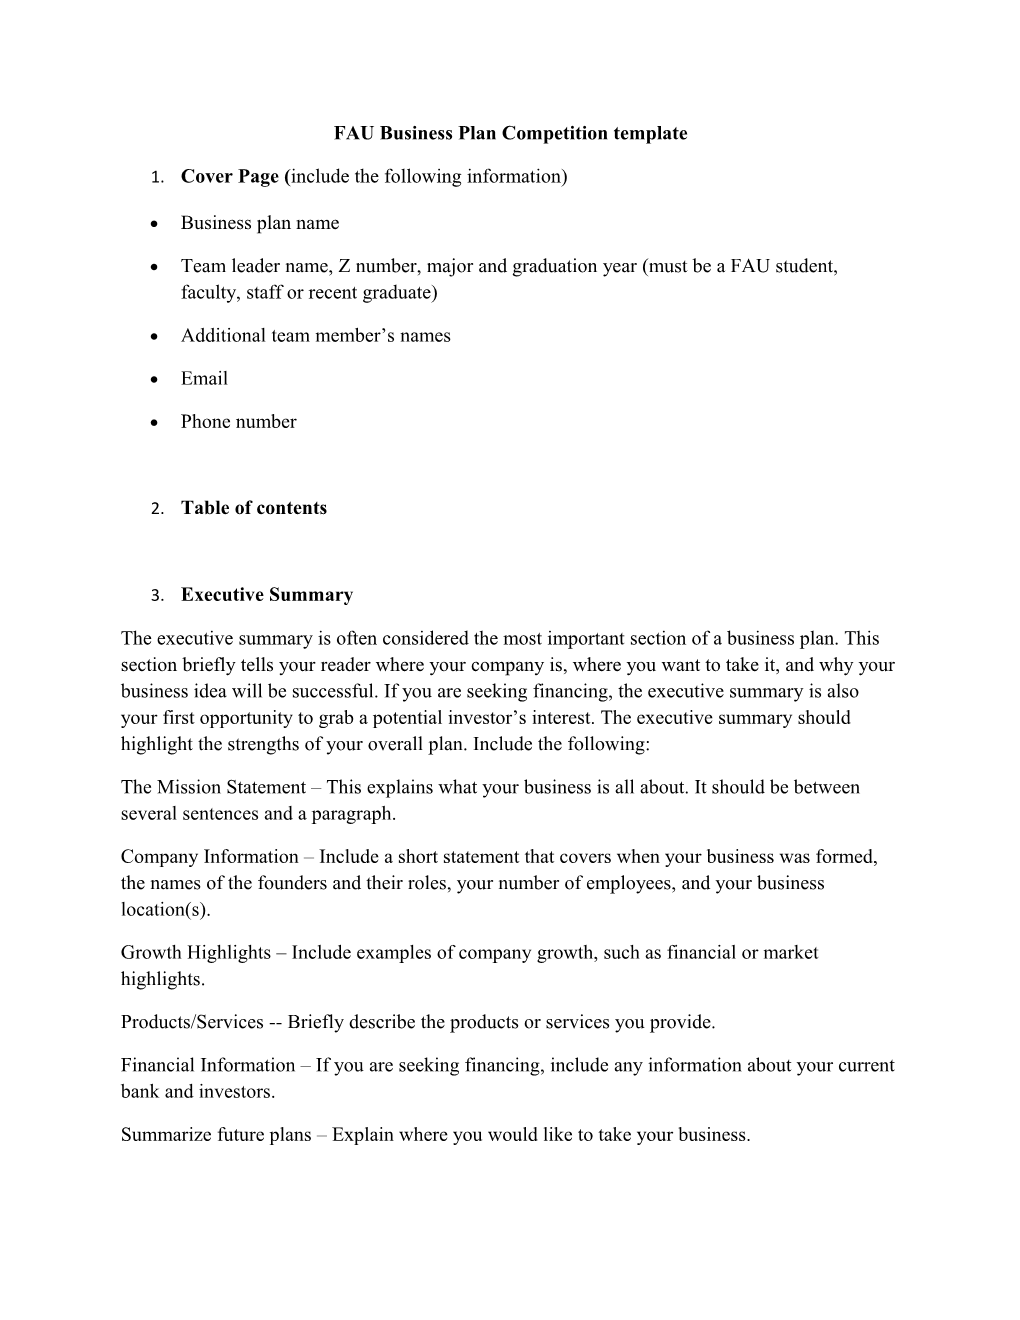 FAU Business Plan Competition Template